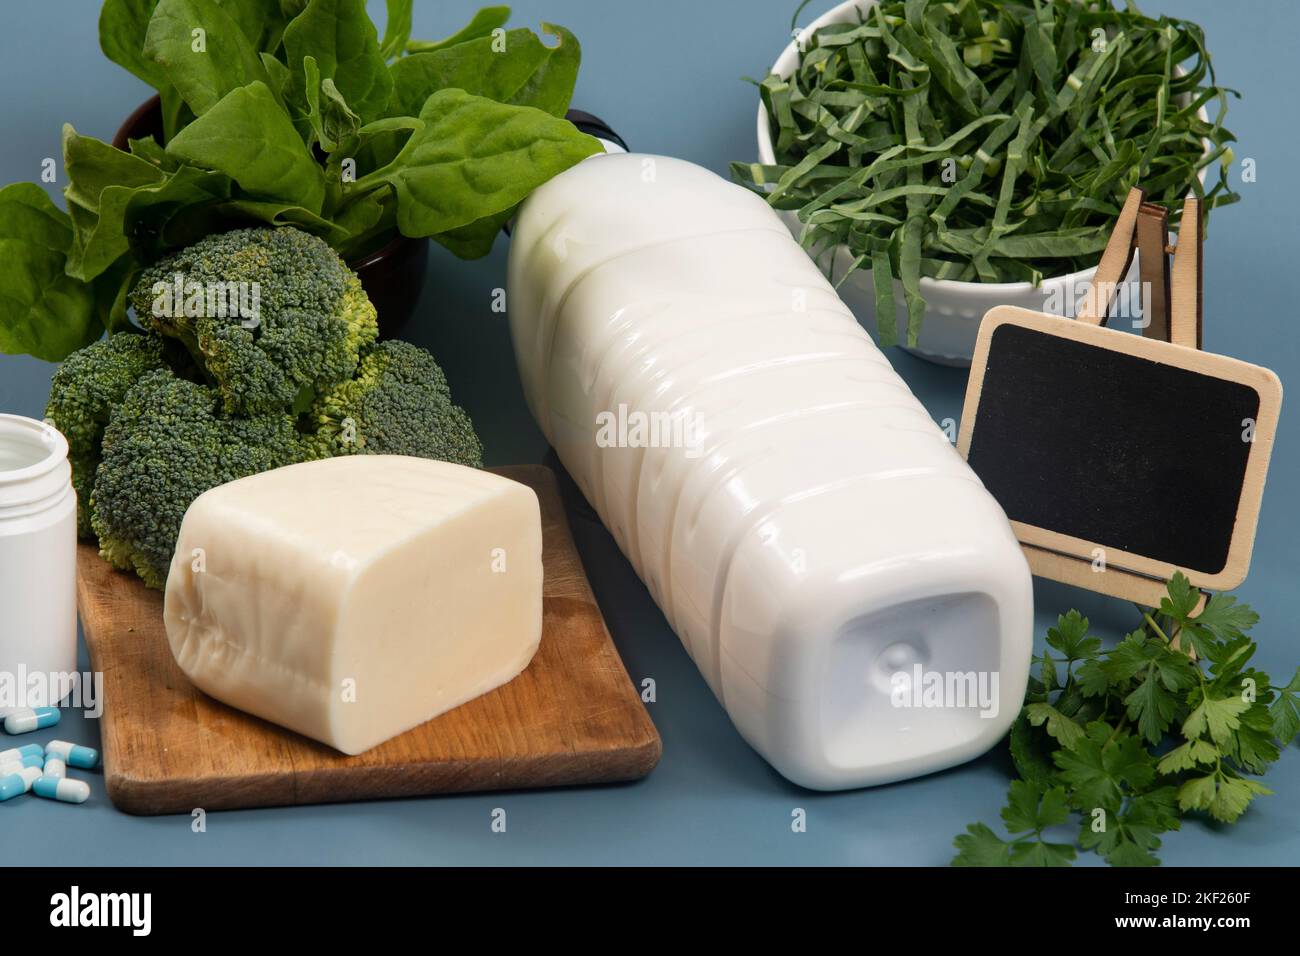 main sources of calcium for the body to help fight osteoporosis. Stock Photo